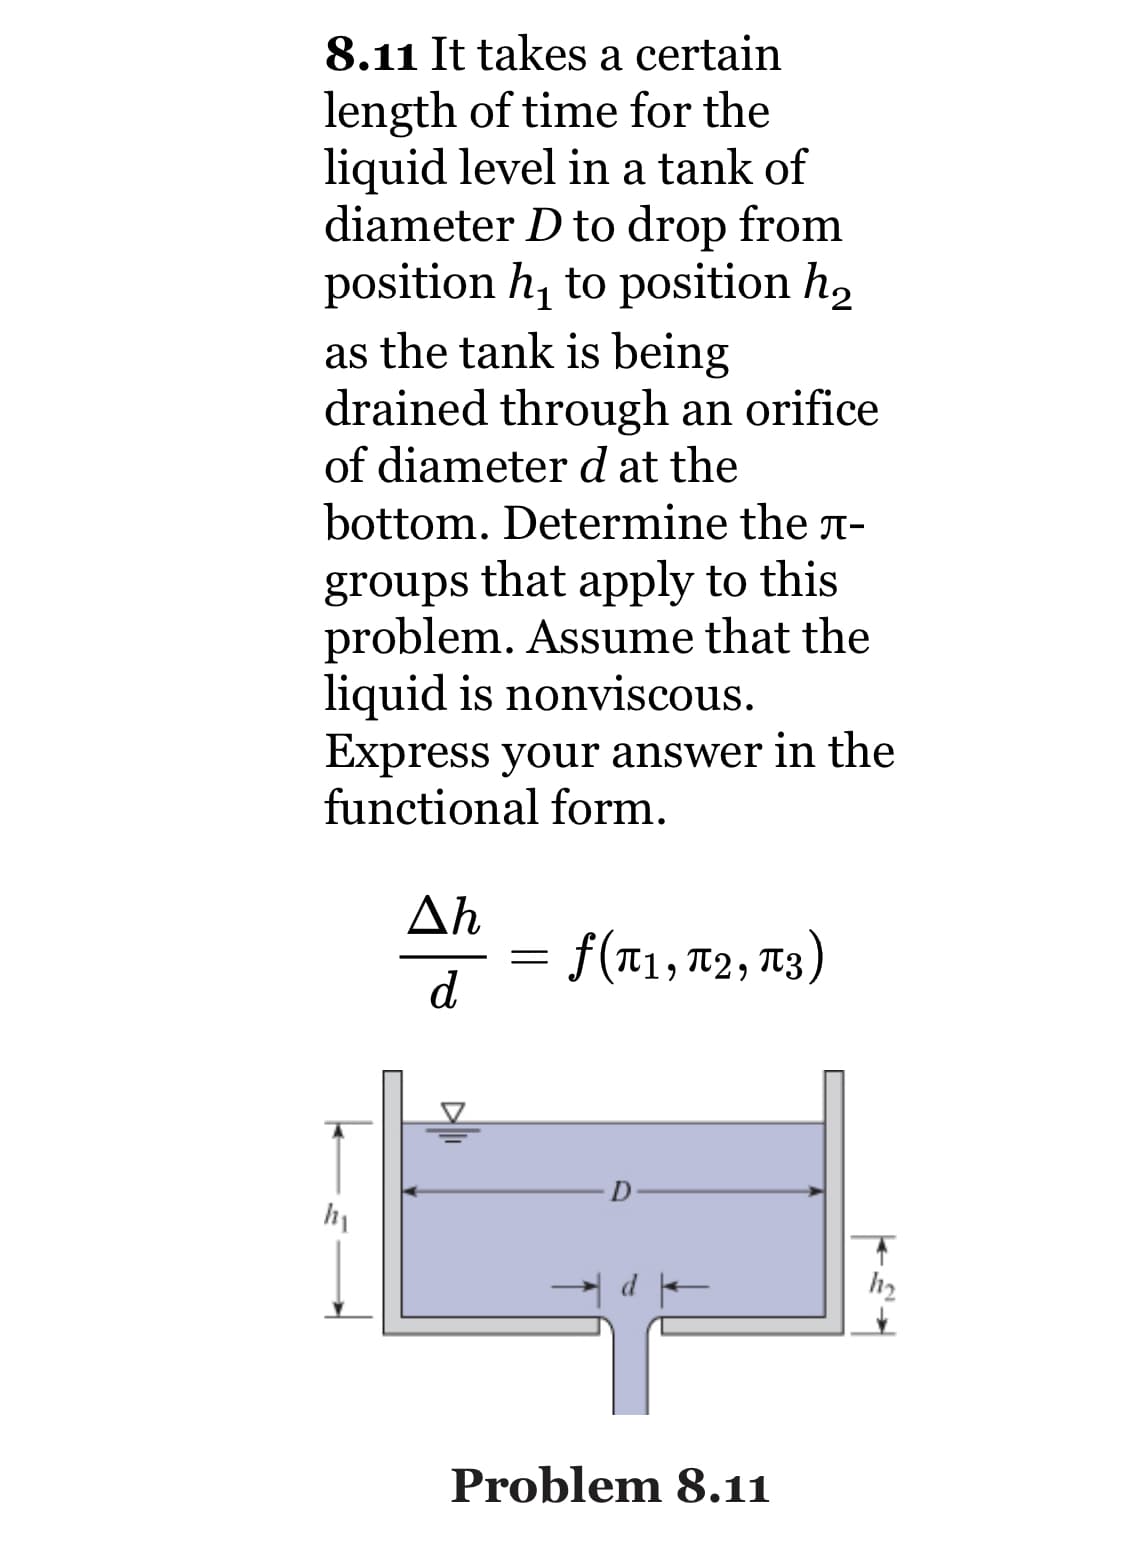 8.11 It takes a certain
length of time for the
liquid level in a tank of
diameter D to drop from
position h, to position h,
as the tank is being
drained through an orifice
of diameter d at the
bottom. Determine the n-
groups that apply to this
problem. Assume that the
liquid is nonviscous.
Express your answer in the
functional form.
Ah
= 13)
f(T1, T2,
d
h2
Problem 8.11
